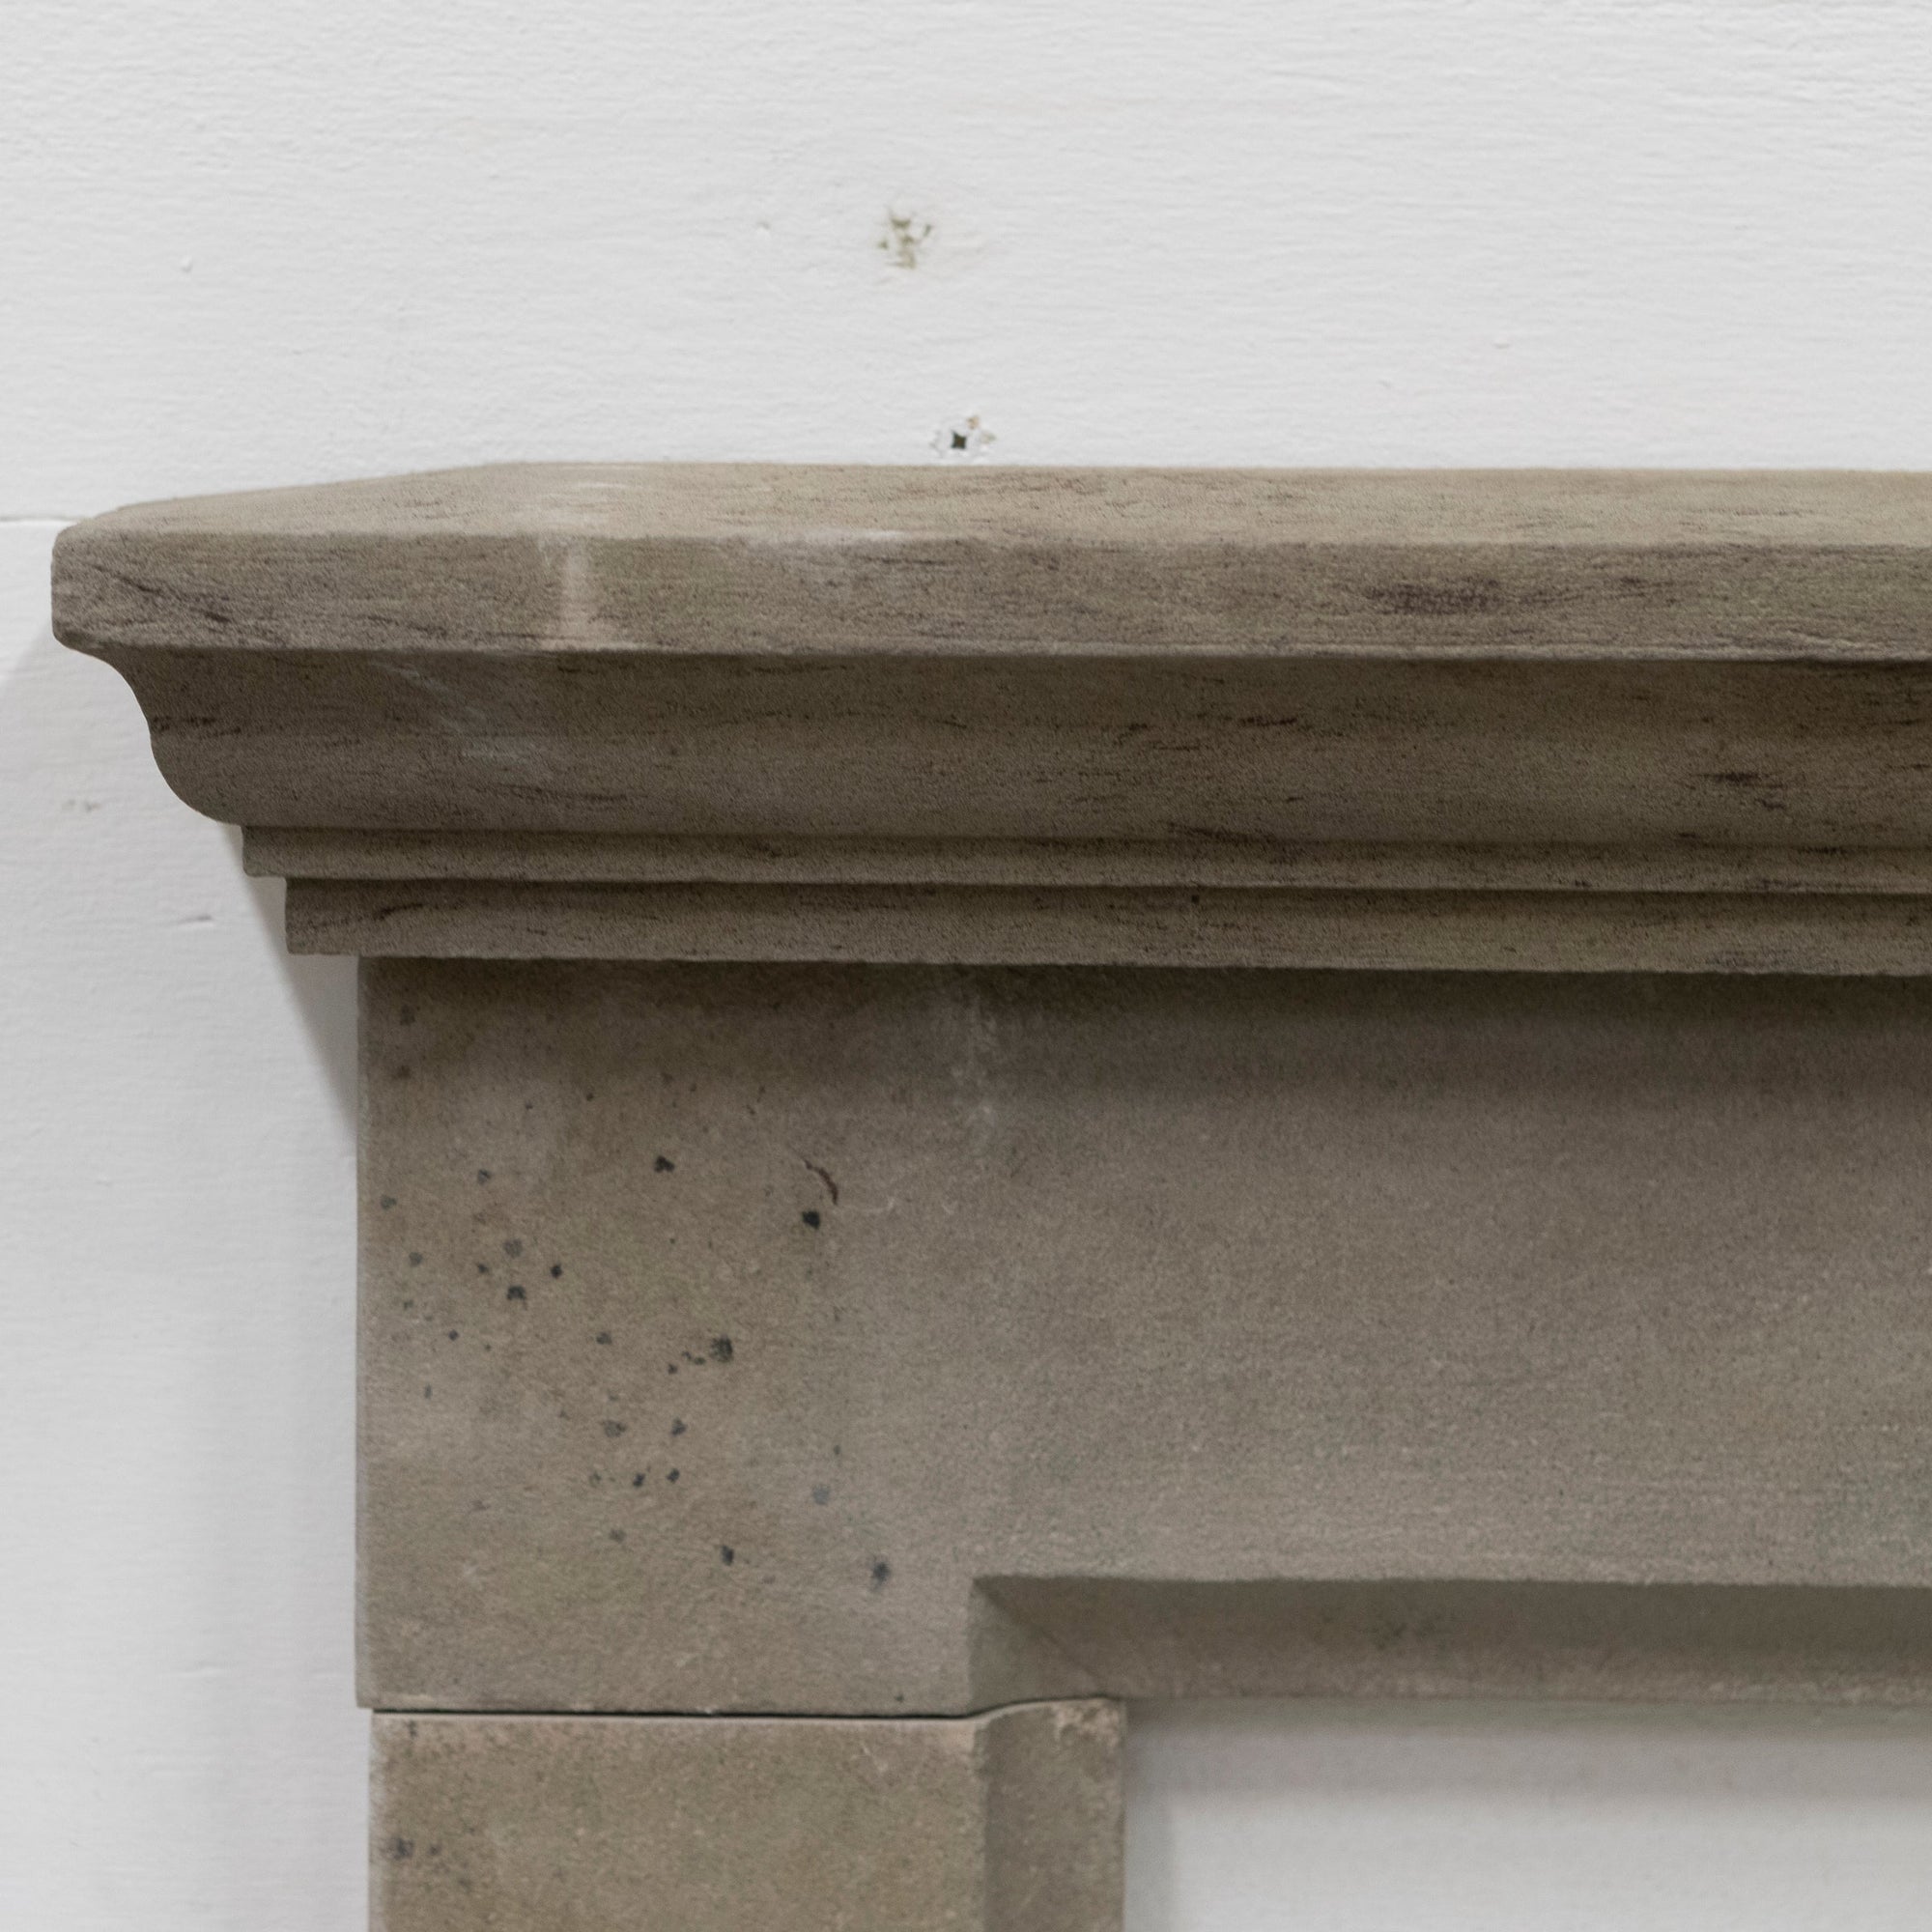 Antique Late 18th Century Stone Fireplace Surround | The Architectural Forum